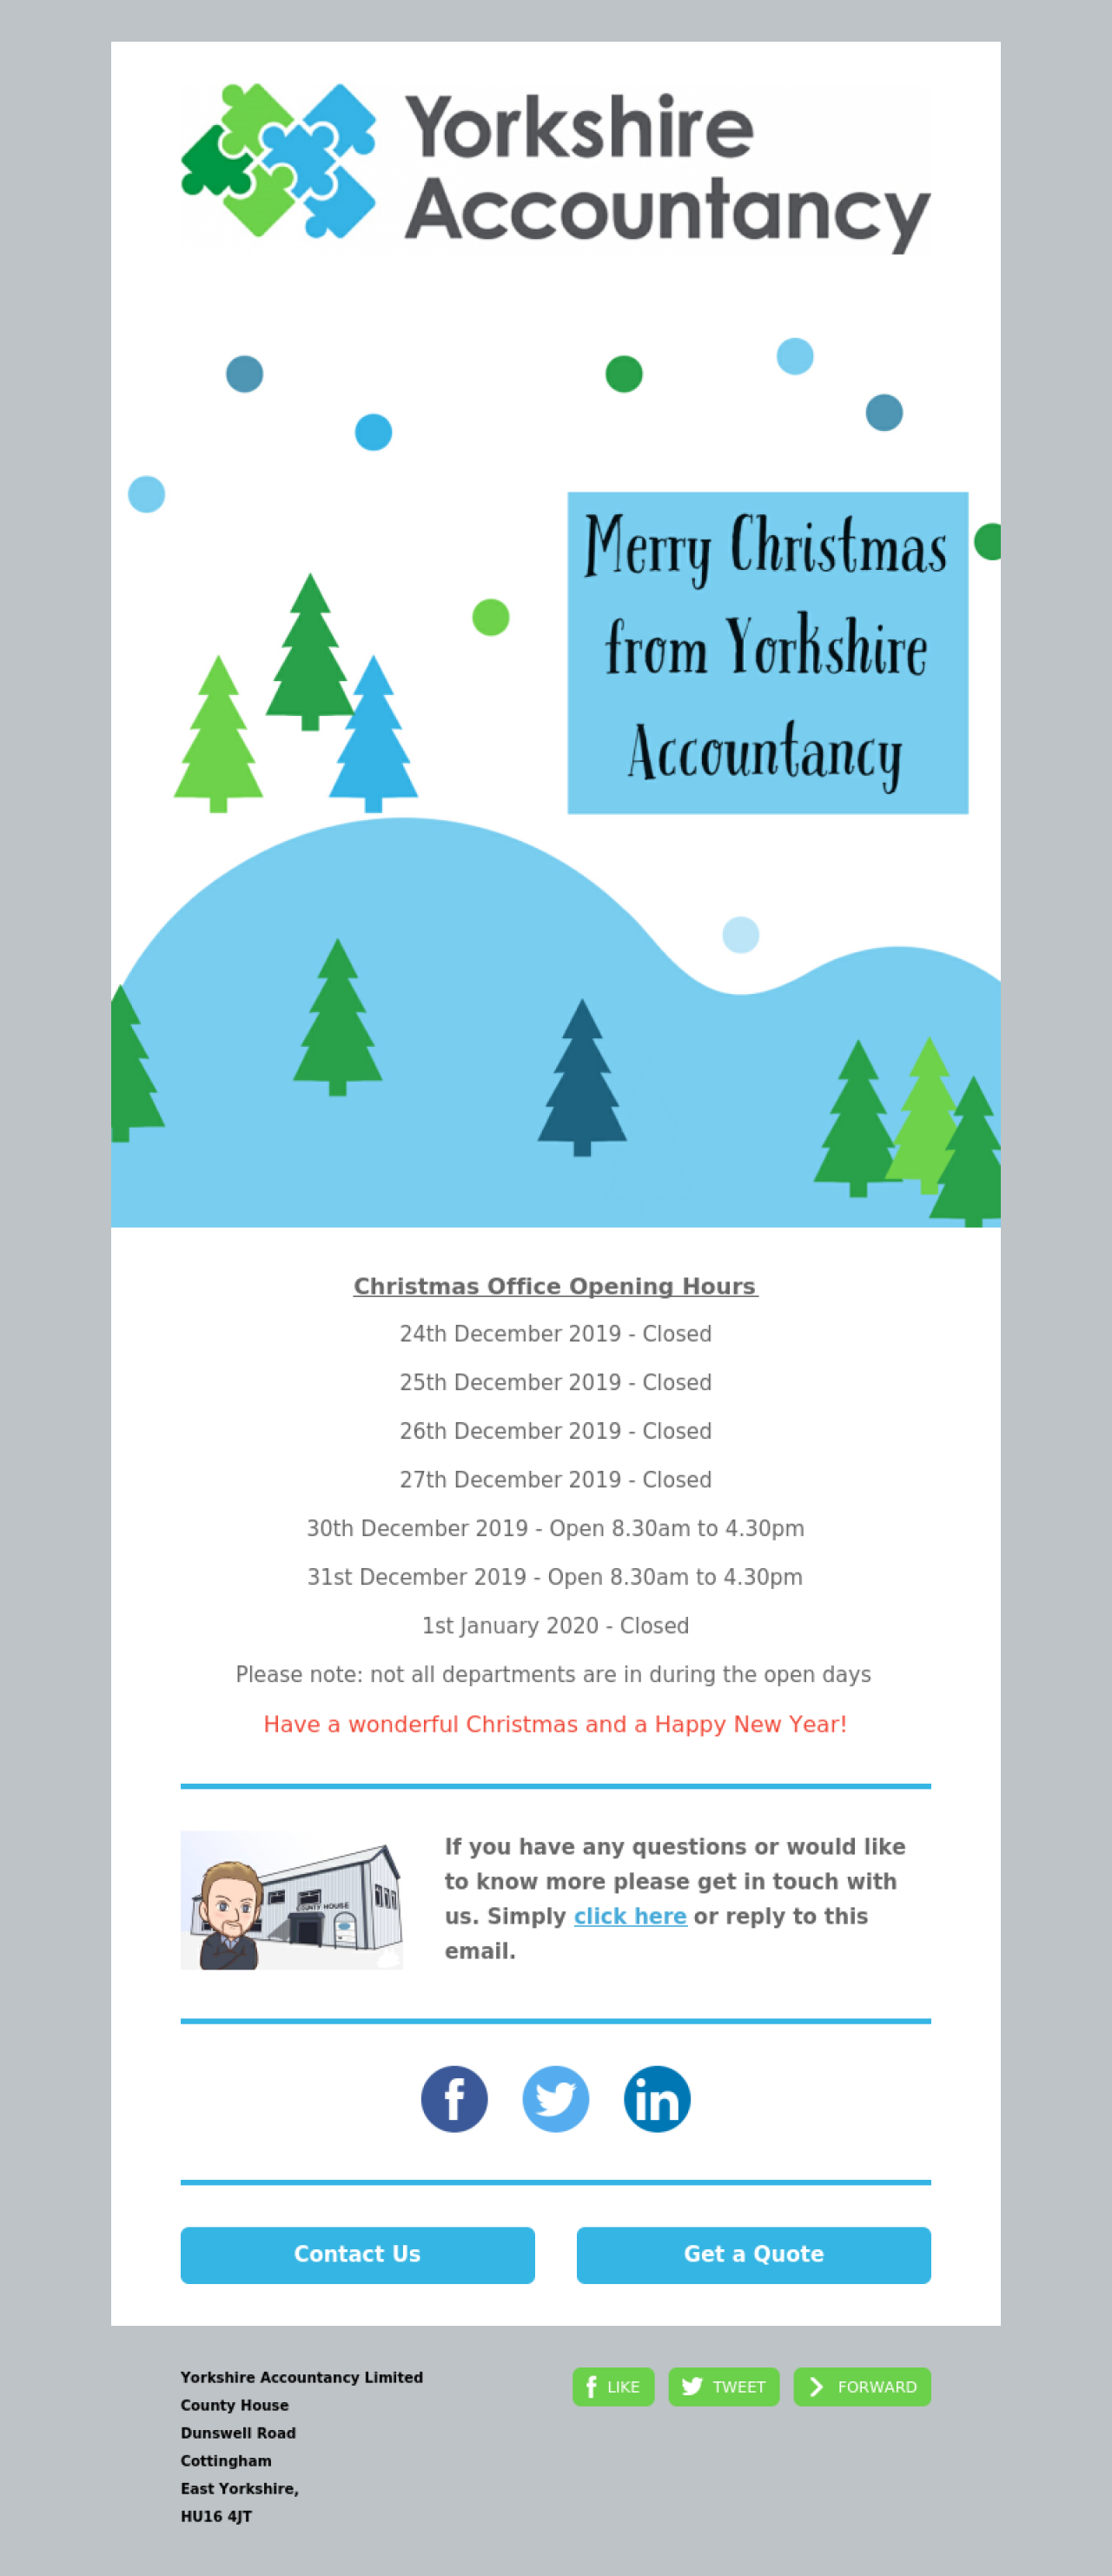 Yorkshire Accountancy Limited - Christmas example - Made with MailerLite